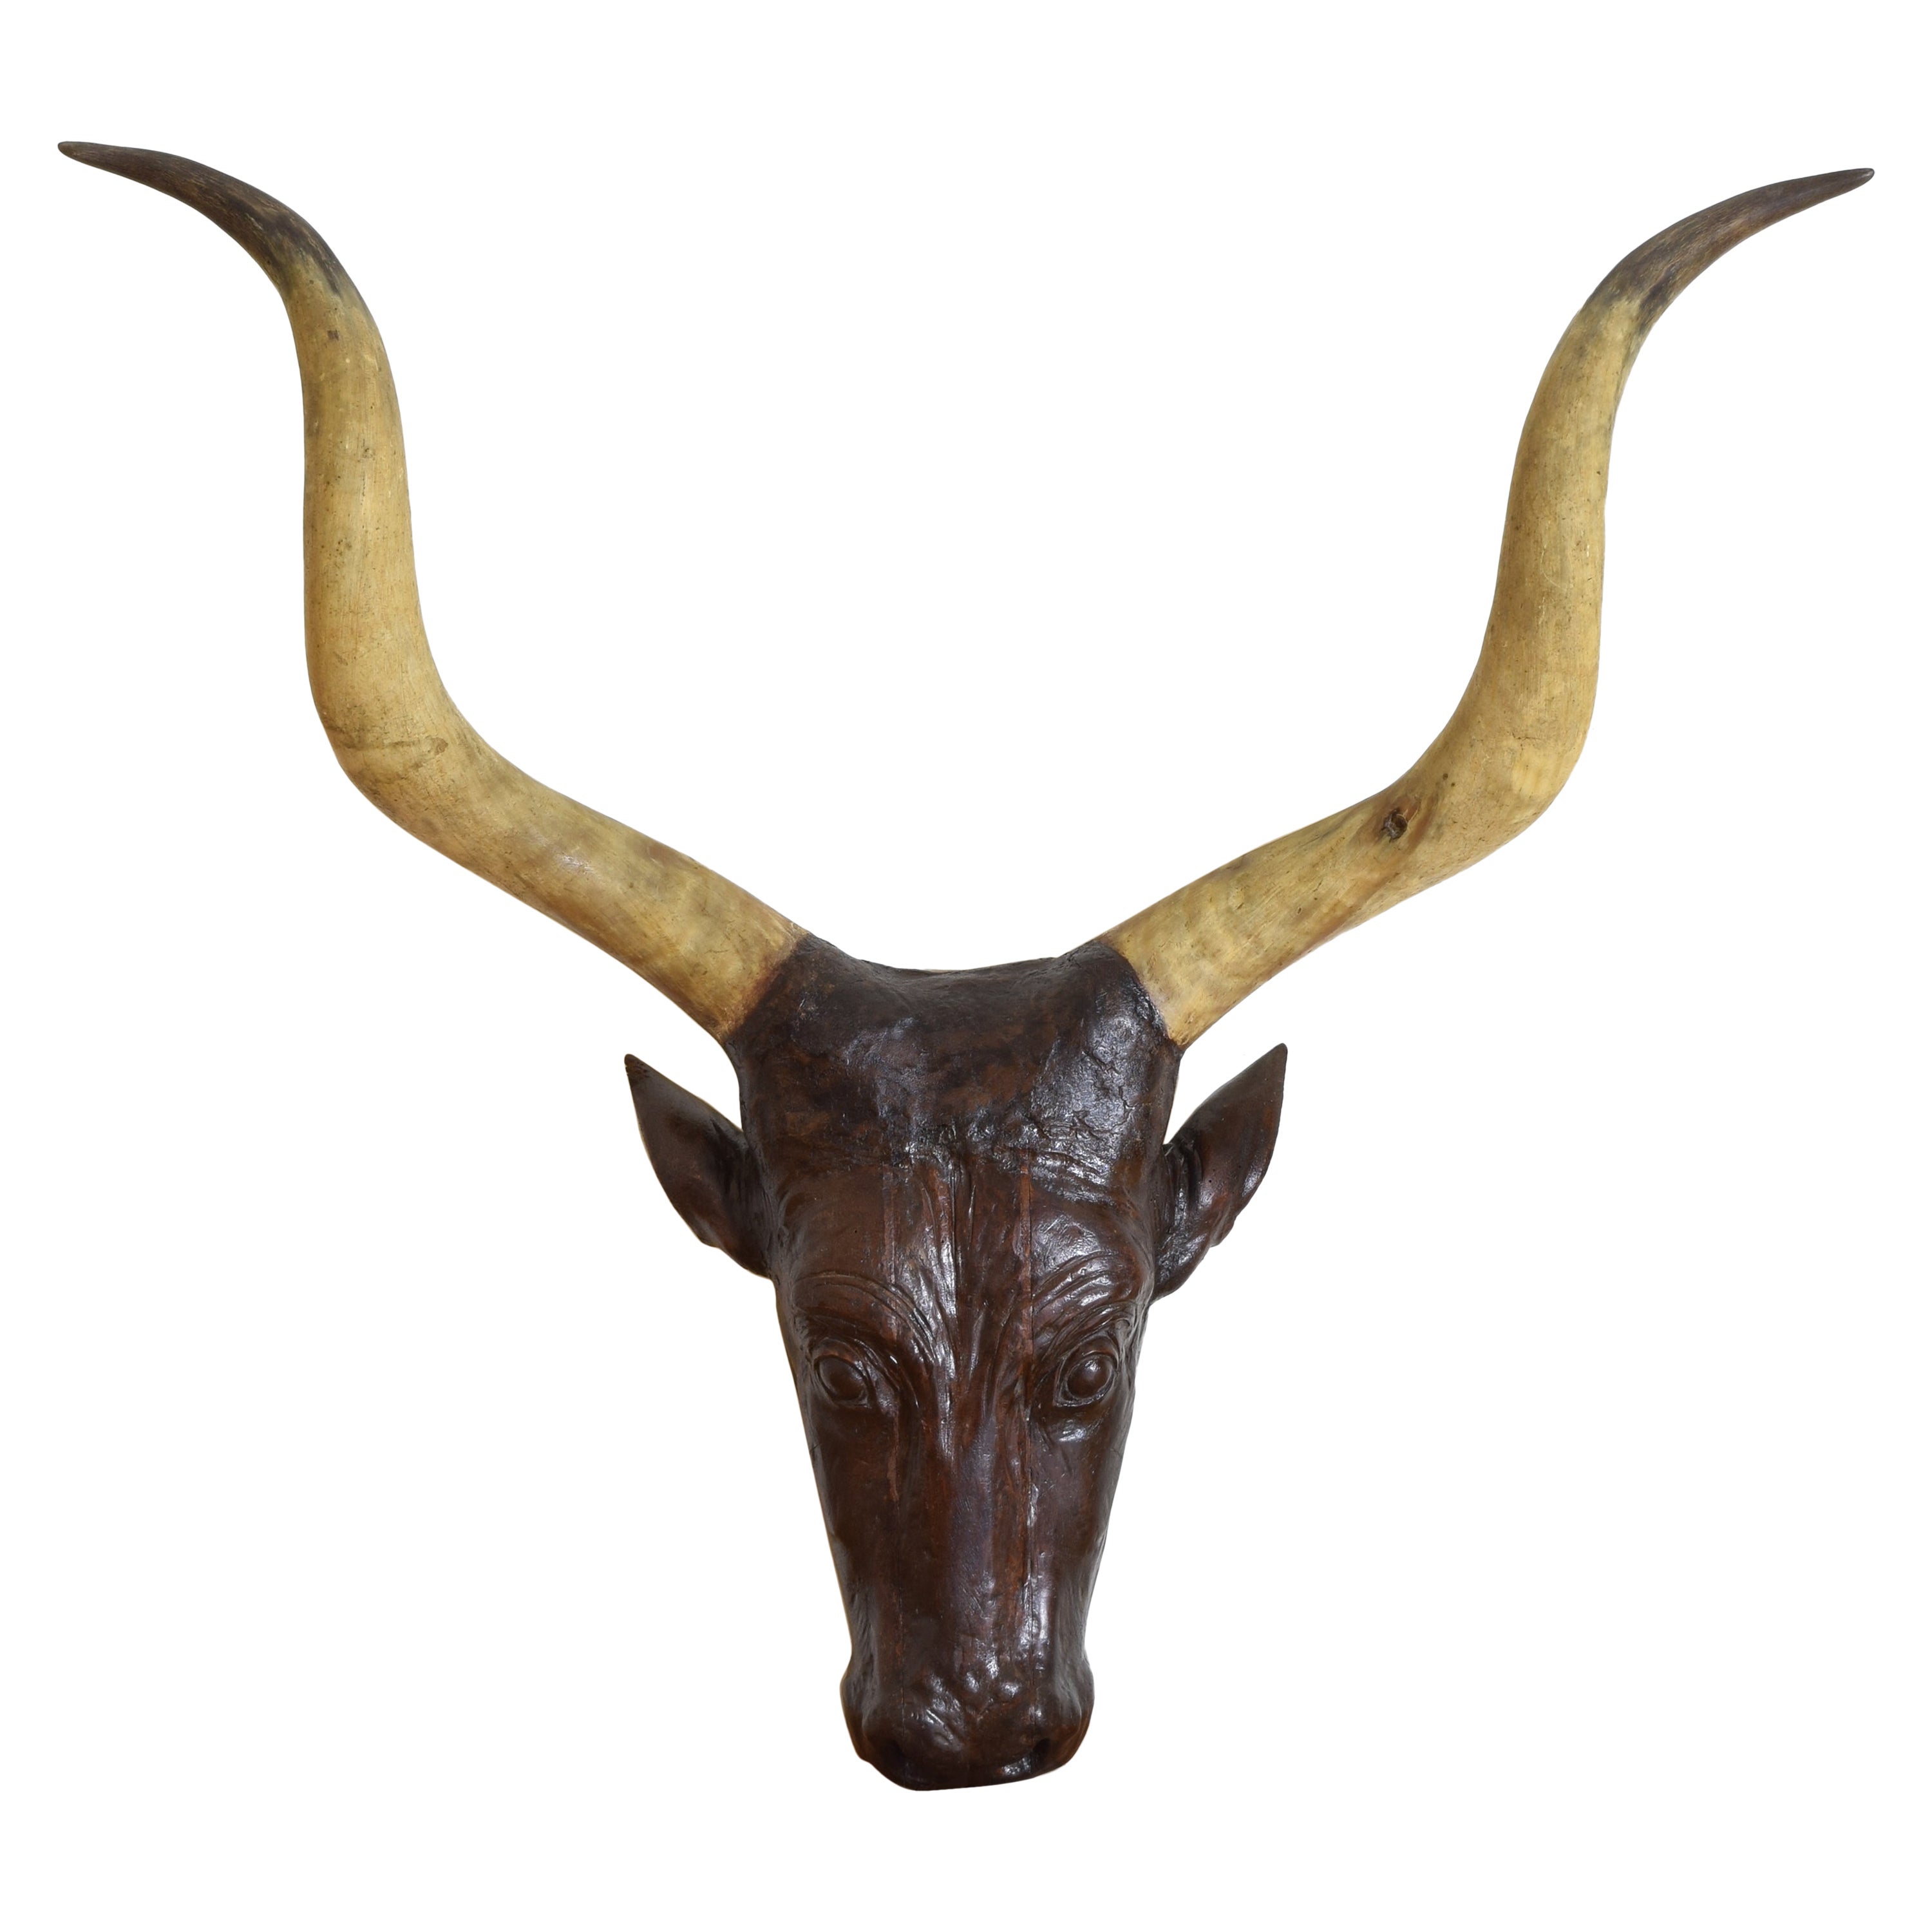 French Significantly Large & Expertly Carved Walnut Cow Head, 2nd half 19th cen.